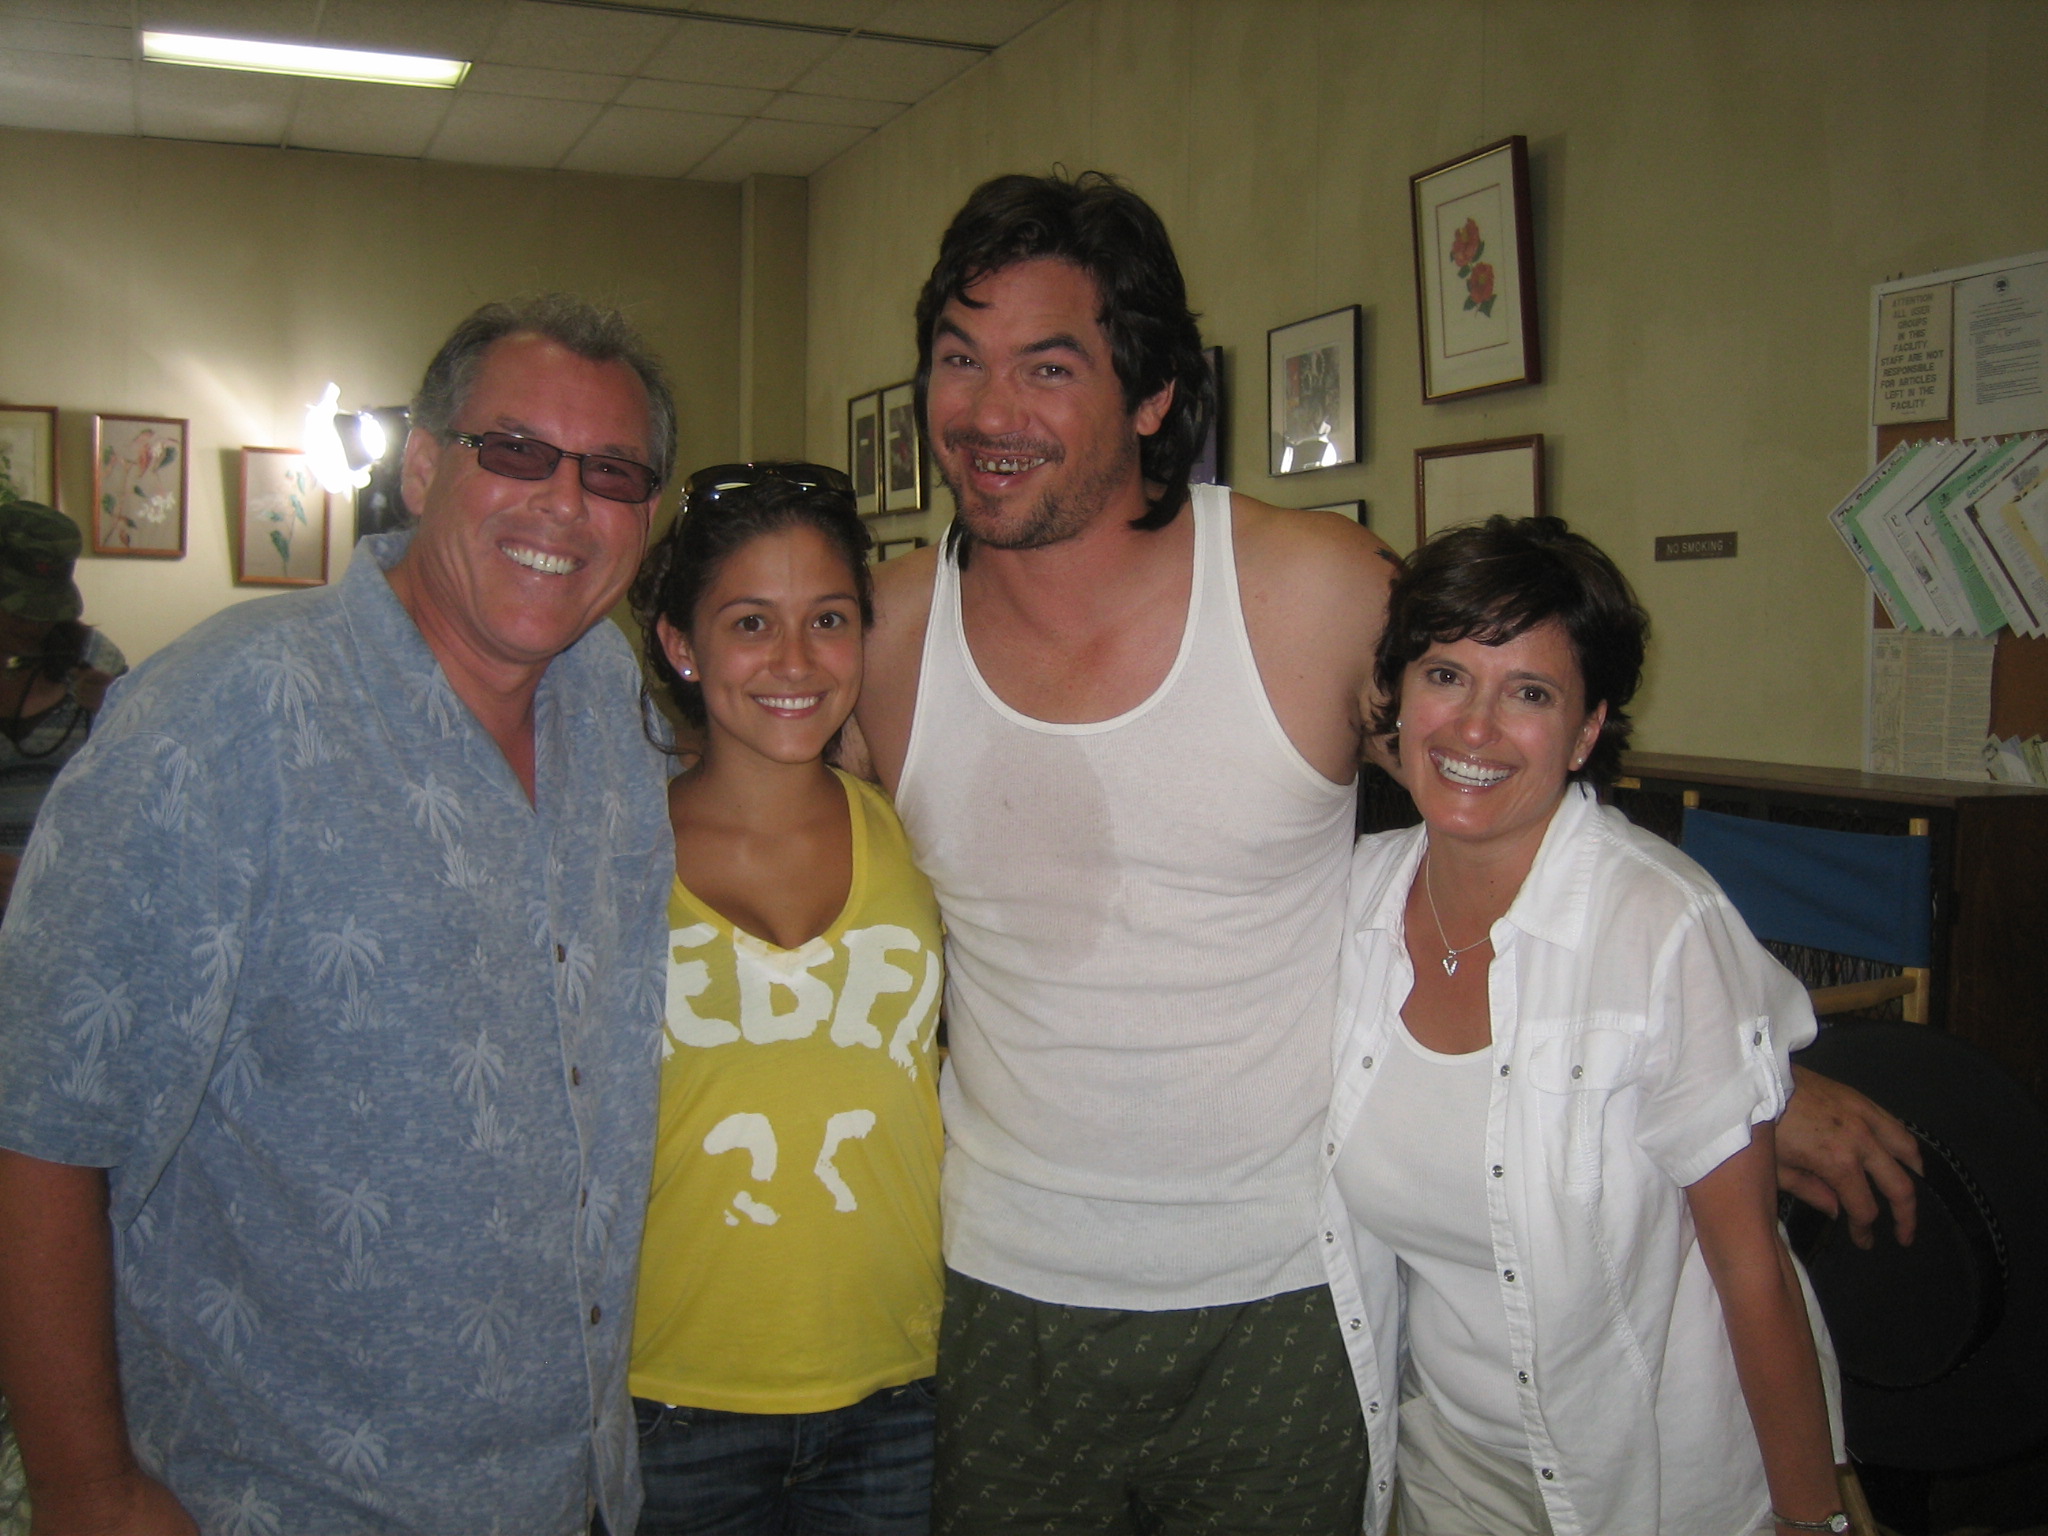 Mark Maine, Brise Maine, Dean Cain & Vida Maine on the set of Hole in One